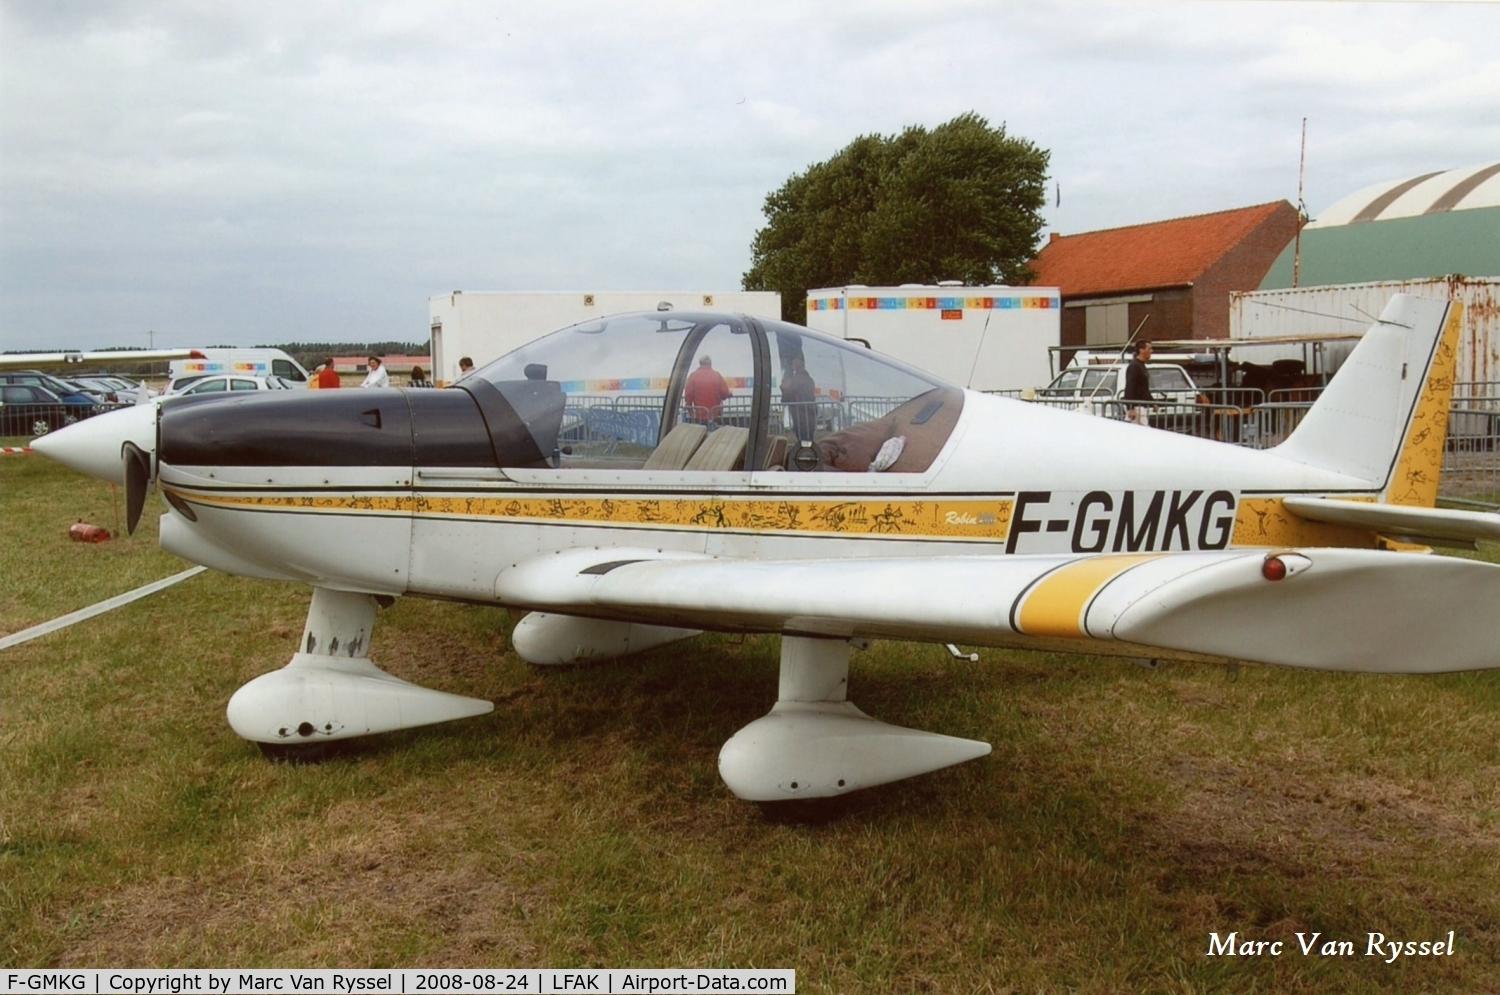 F-GMKG, 1993 Robin HR-200-120B C/N 259, Visitor at Les Moëres in a previous paint scheme.